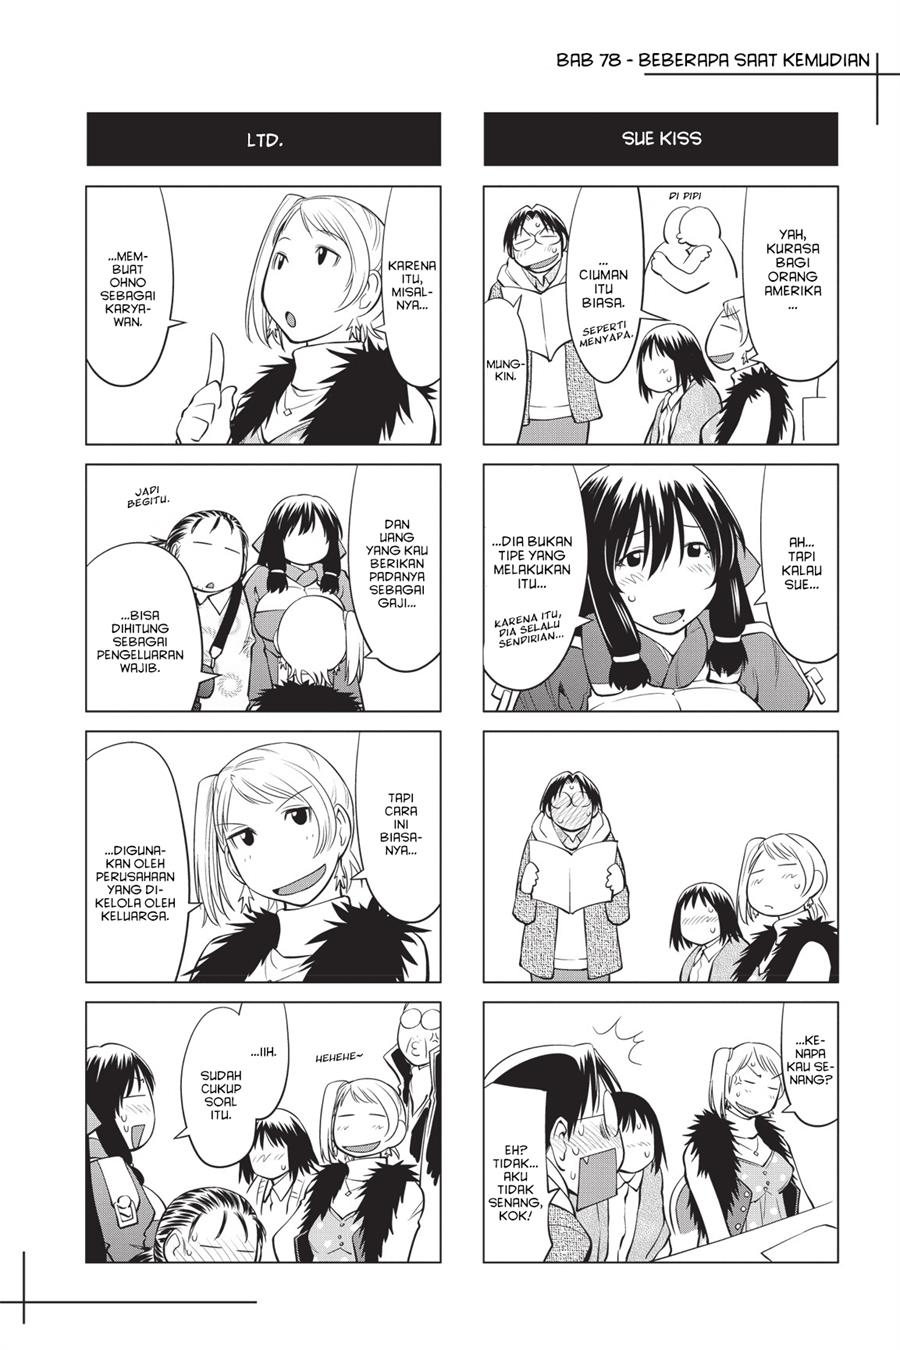 Genshiken – The Society for the Study of Modern Visual Culture Chapter 78 Image 26